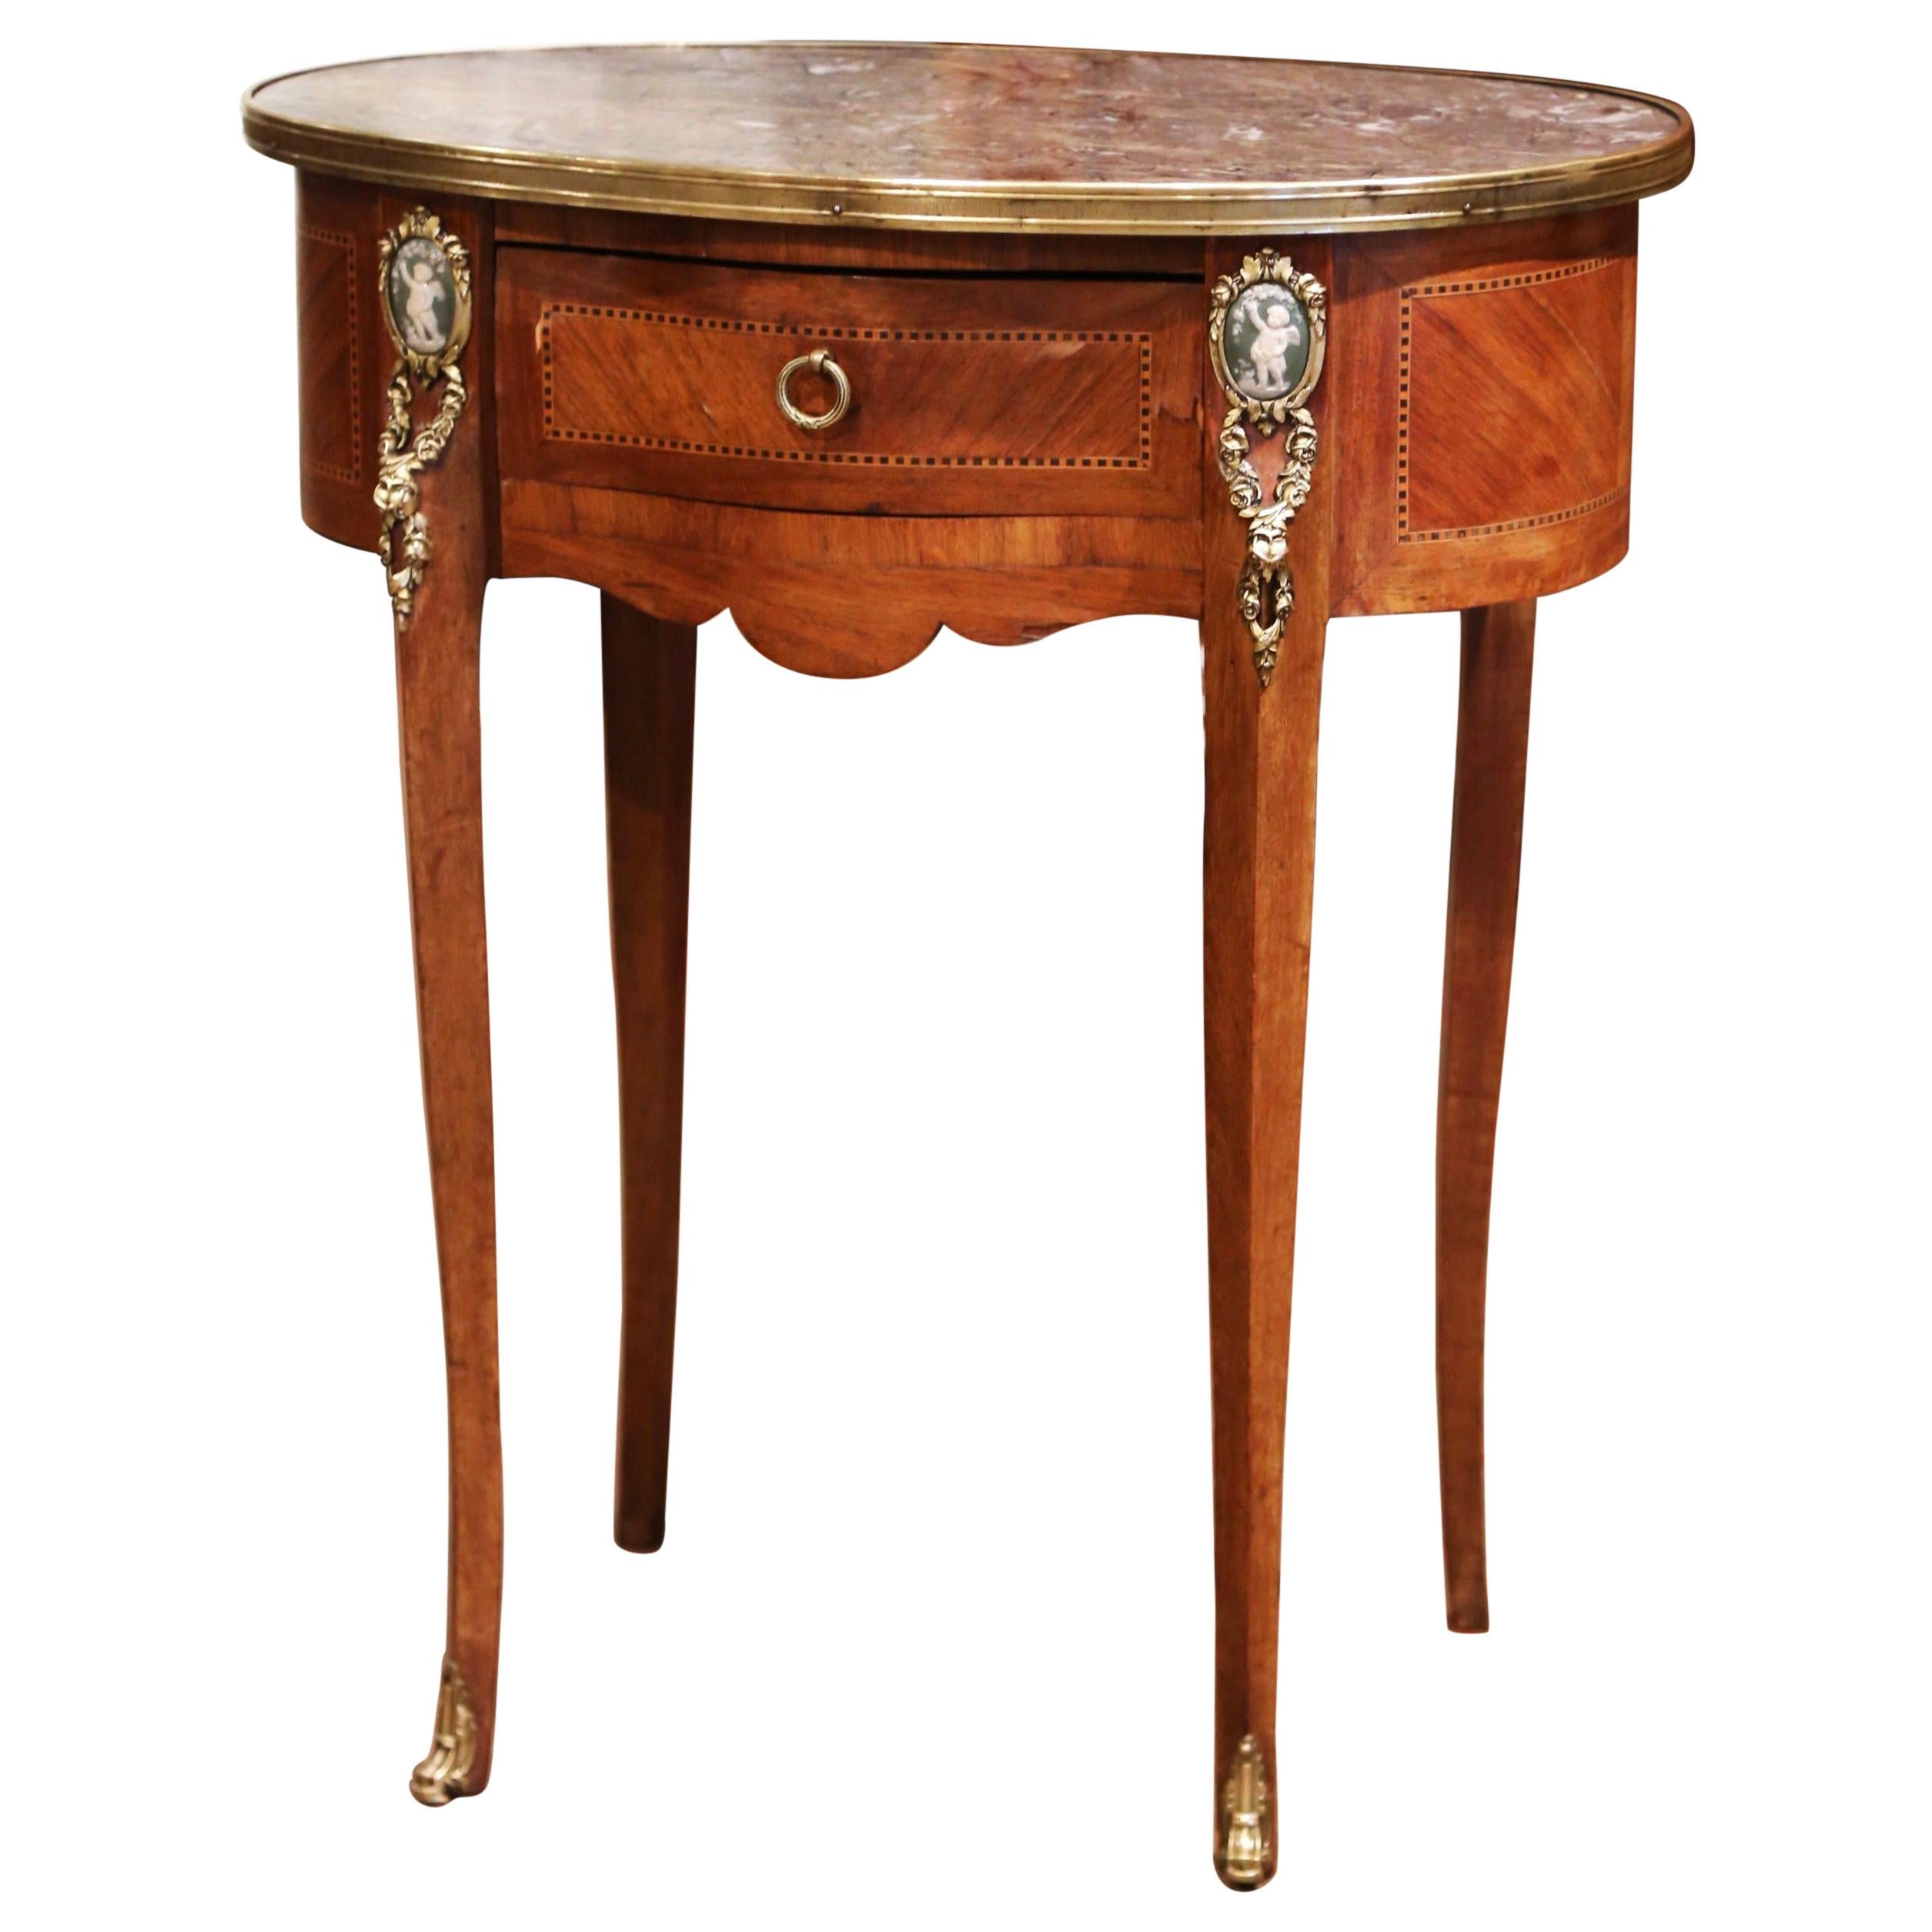 19th Century French Walnut Marquetry Side Table with Marble Top and Brass Rim